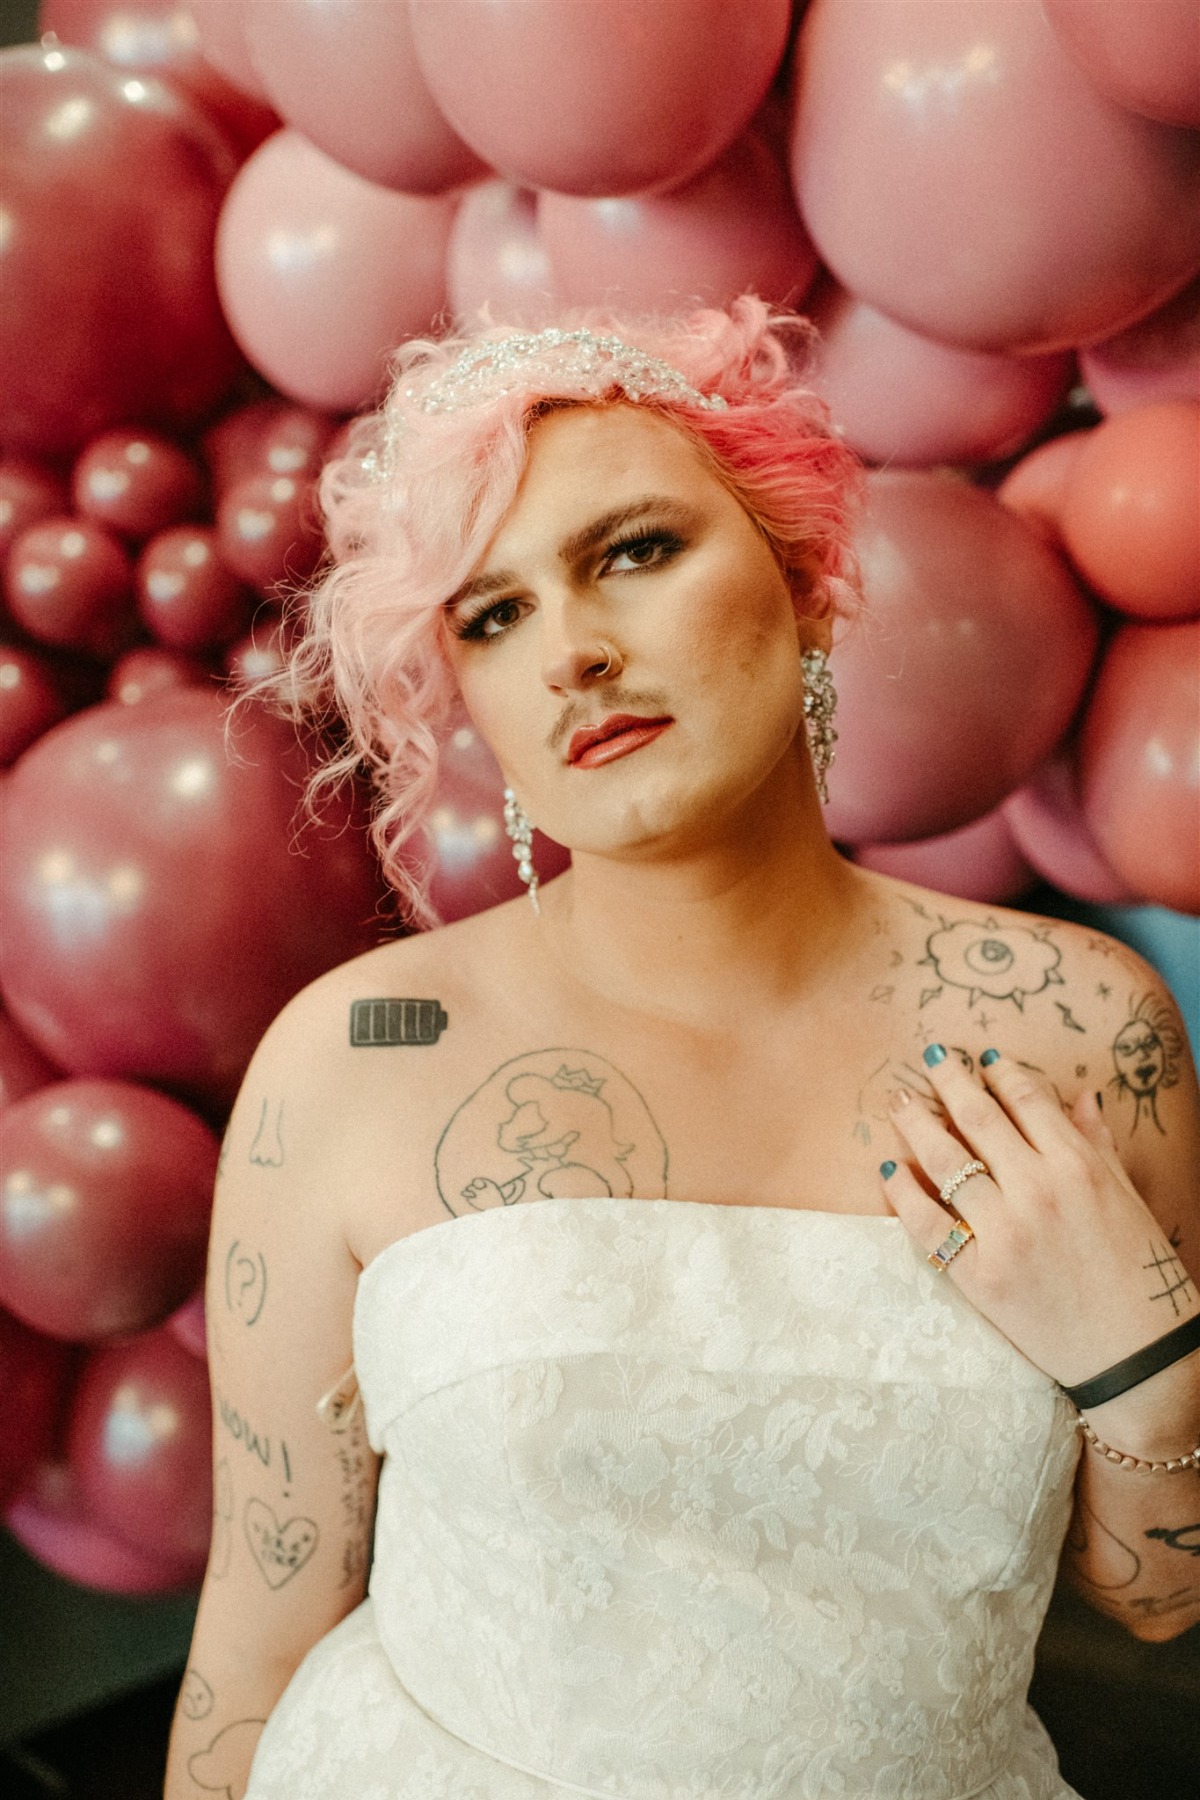 A Self-Love Editorial For A Valentines Day Queen